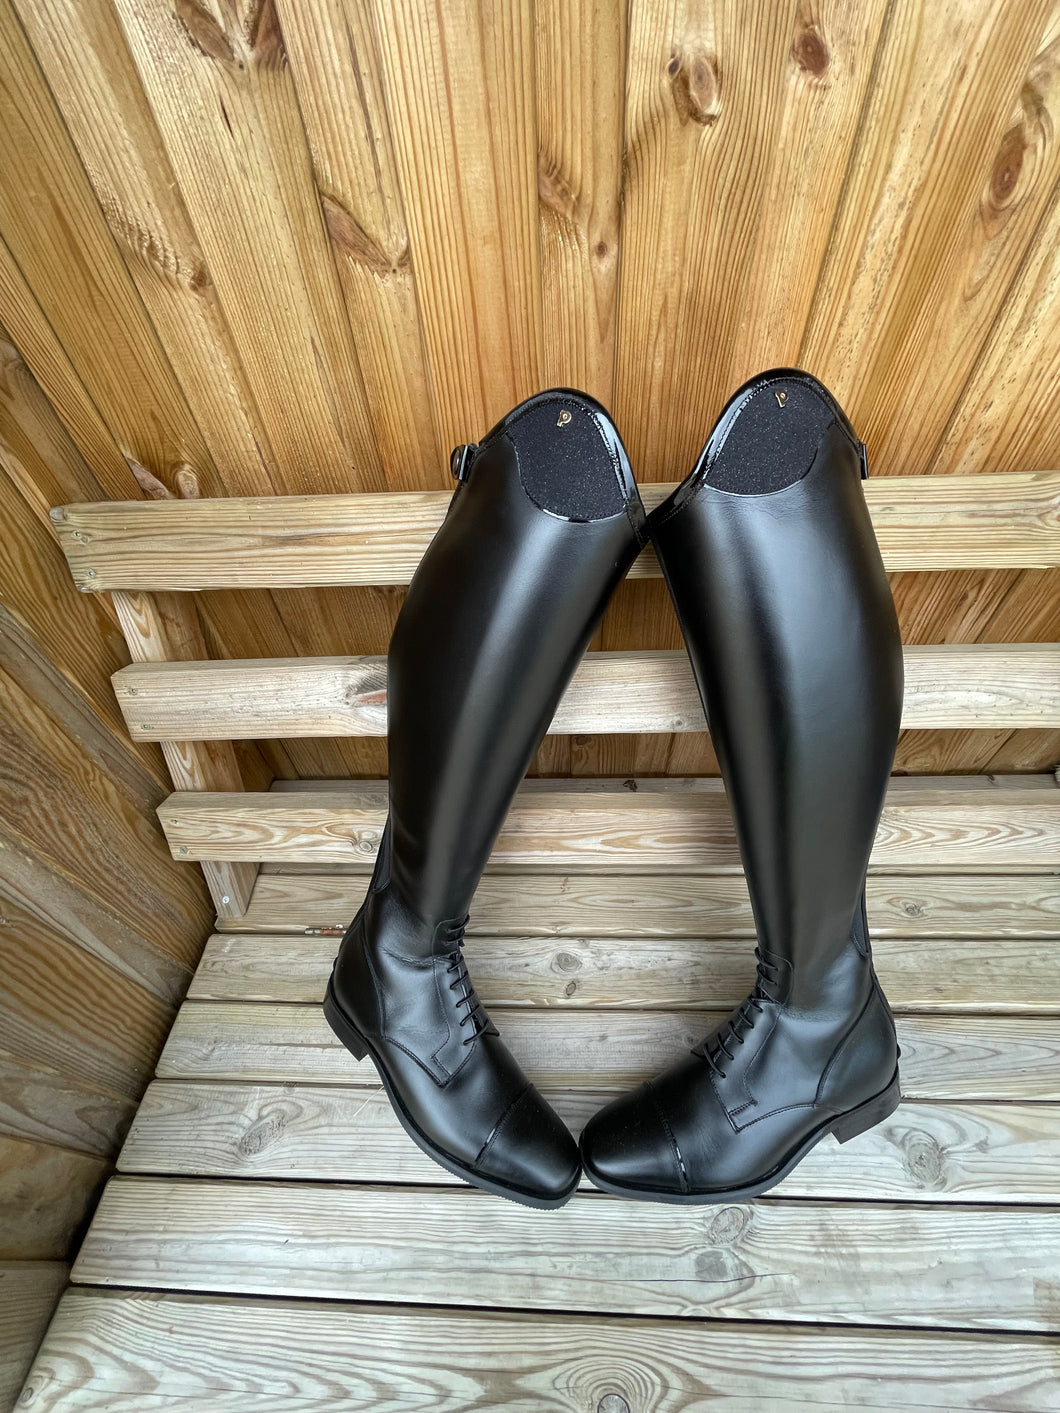 SALE petrie riva boots - ex demo riding boots